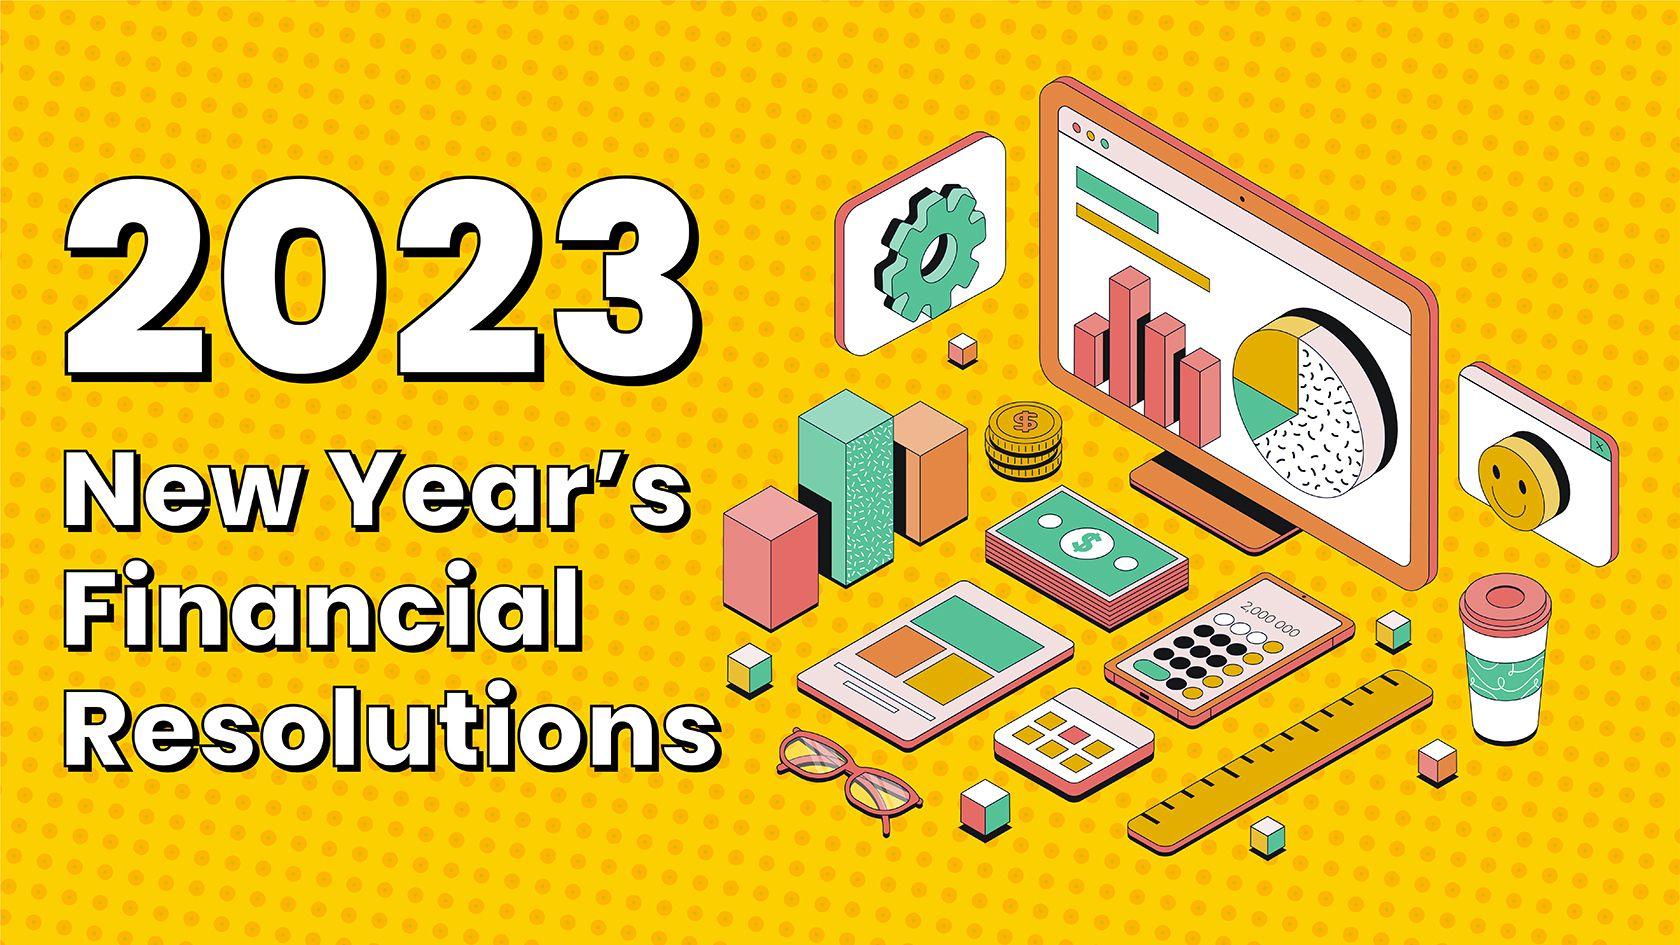 2023-New-Years-Financial-Resolutions-feature-image-3mY8n.jpg